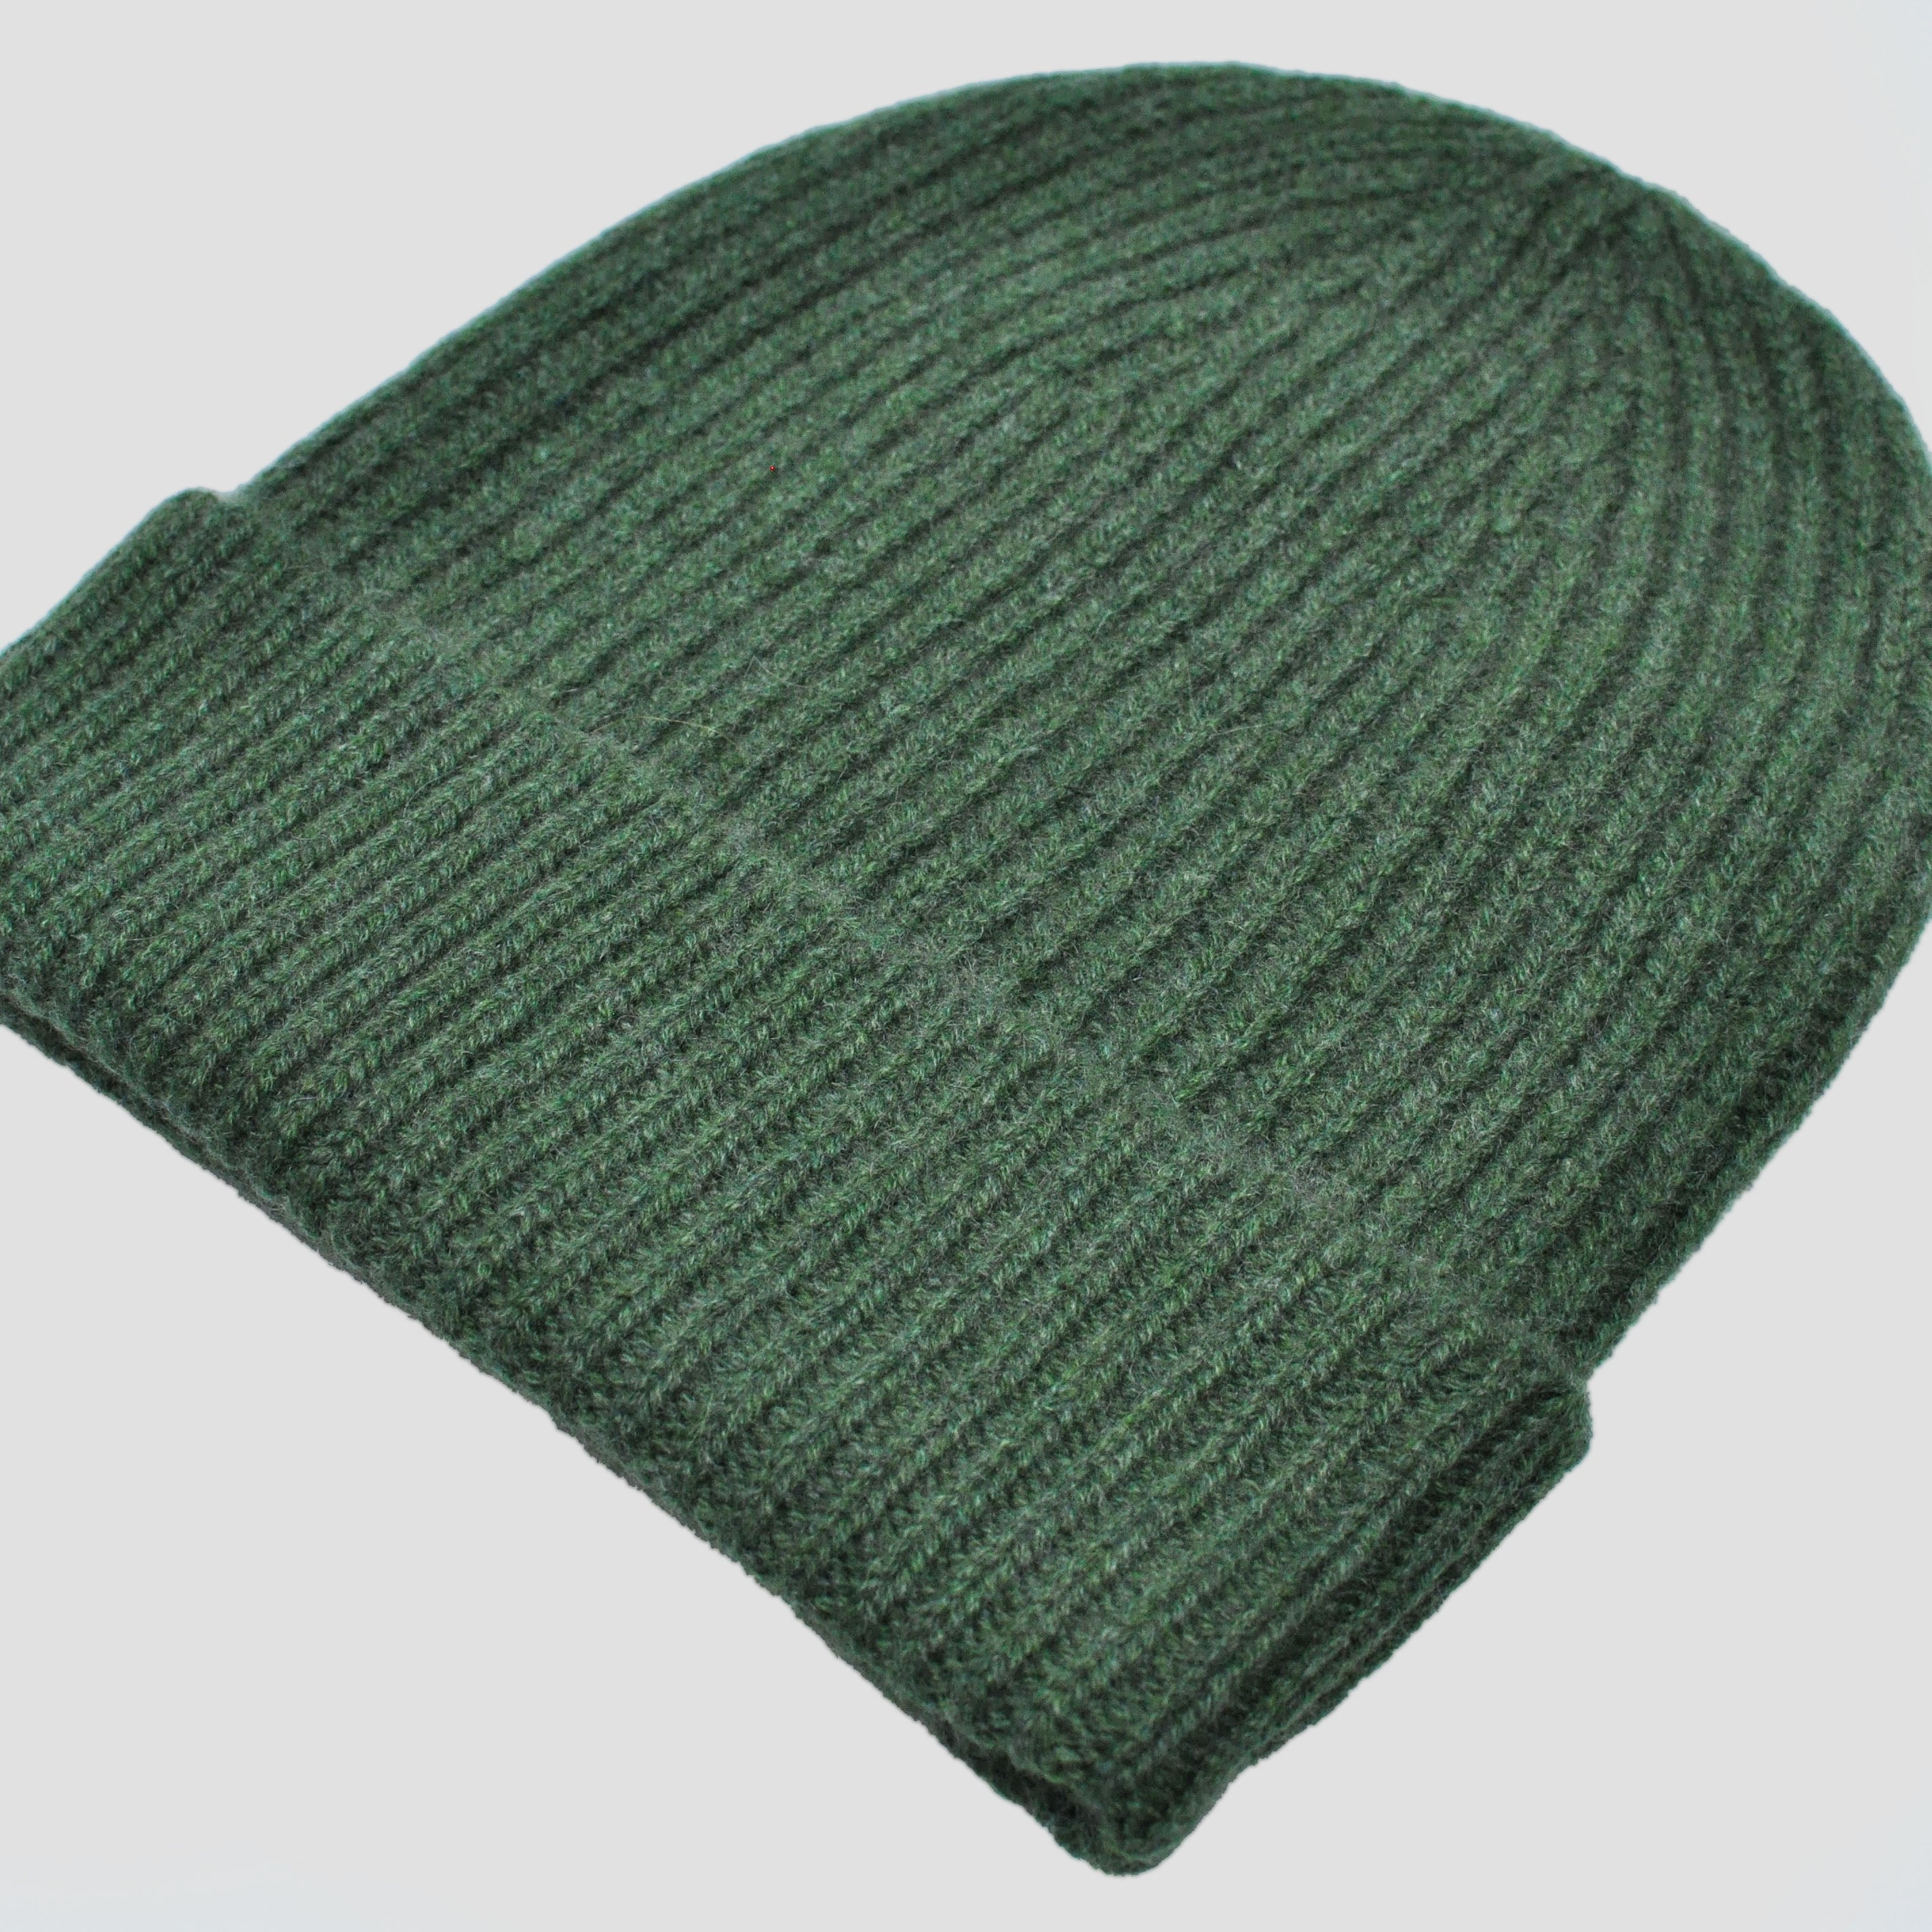 Two Ply Cashmere Winter Beanie in Green